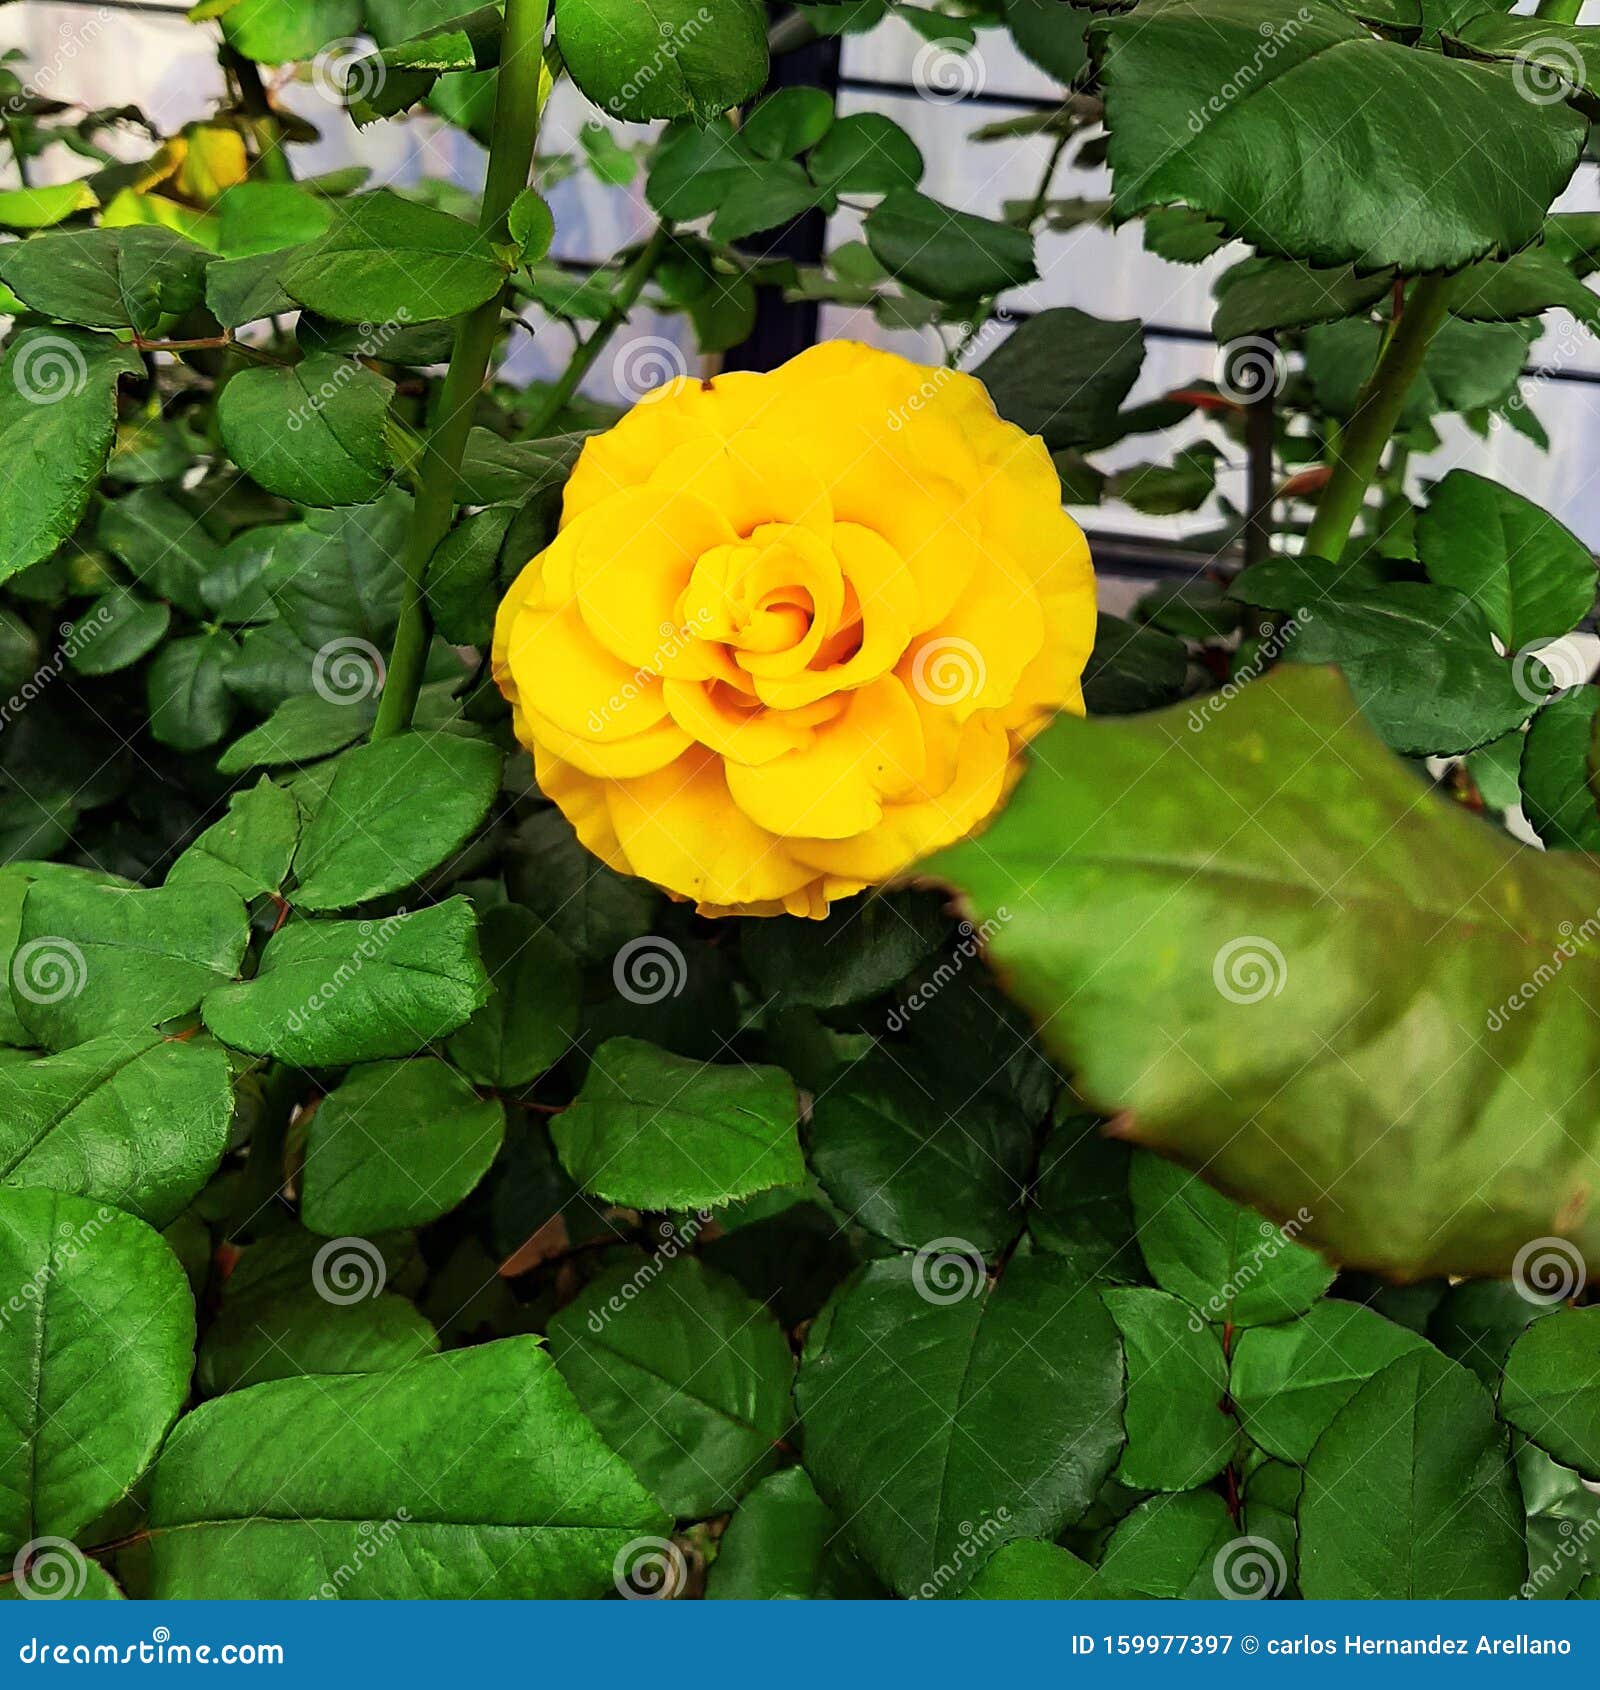 green and yellow rose